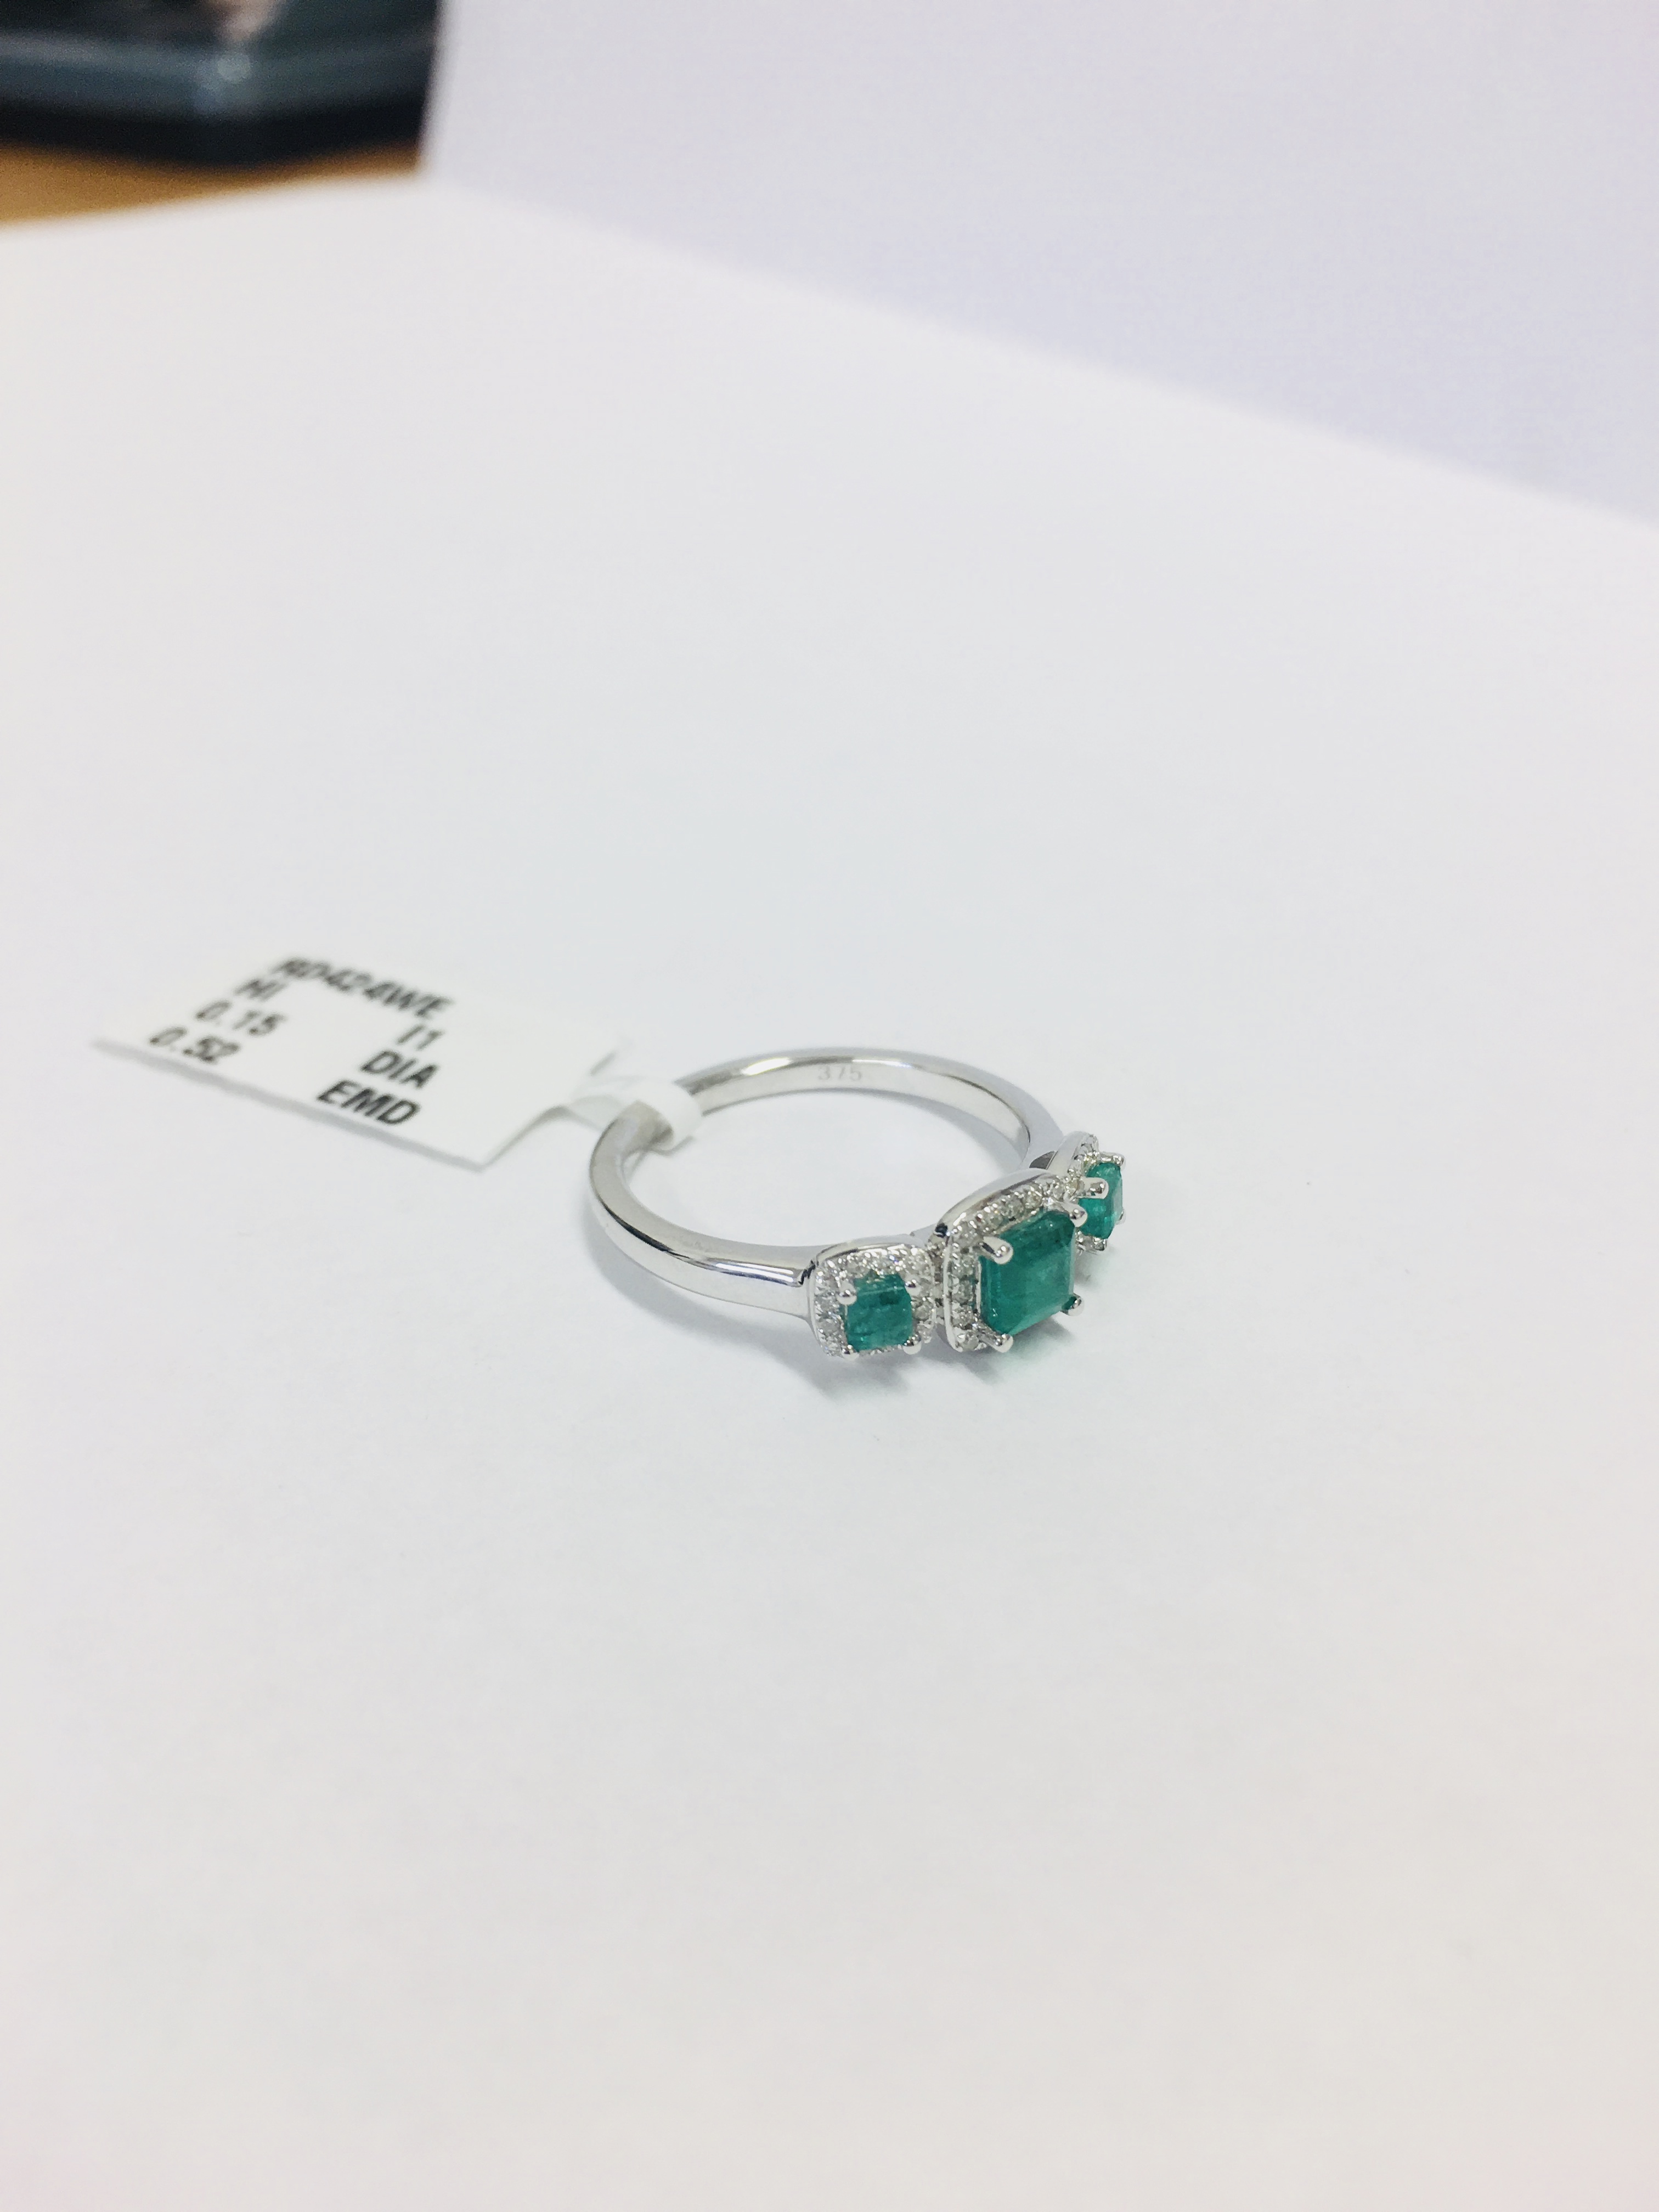 9Ct White Gold Diamond Emerald Cluster Ring, - Image 6 of 6